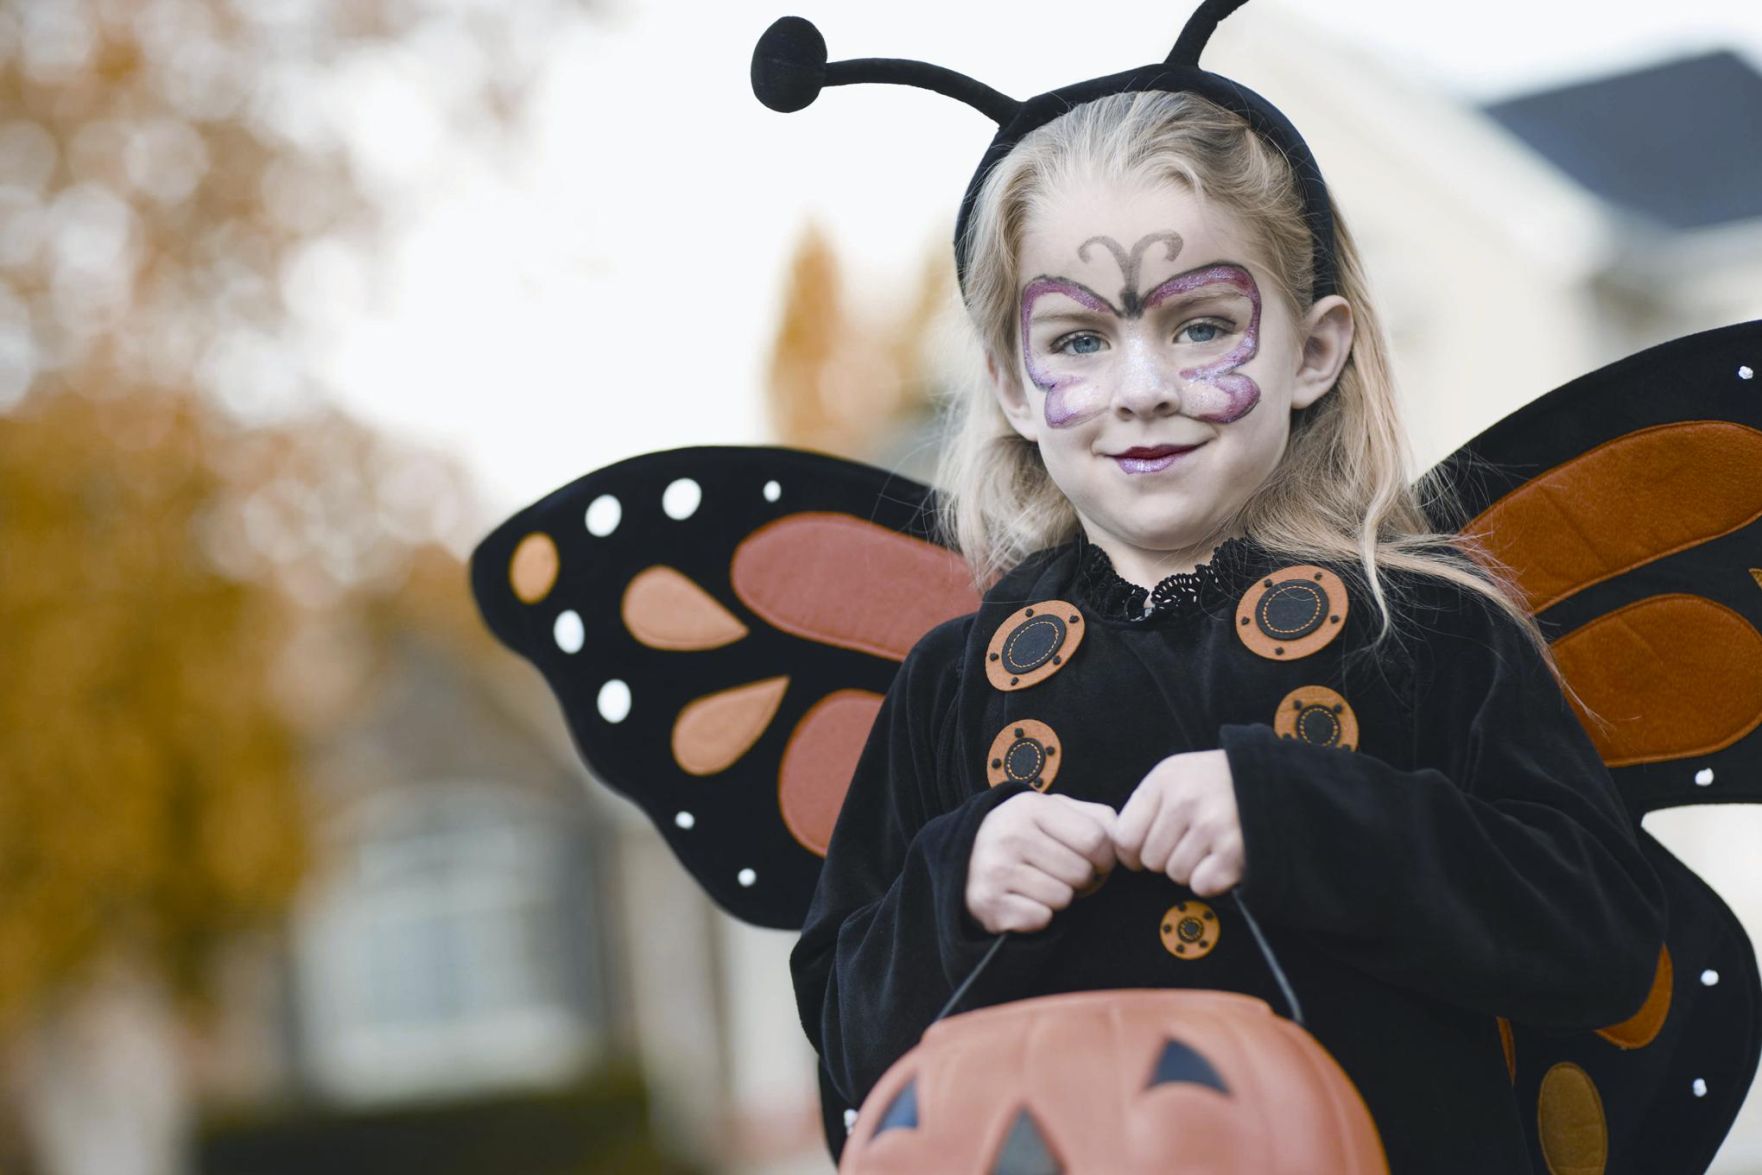 Bug & Insect Costumes | Smiffys Wholesale - Smiffys Trade - Smiffys Trade US